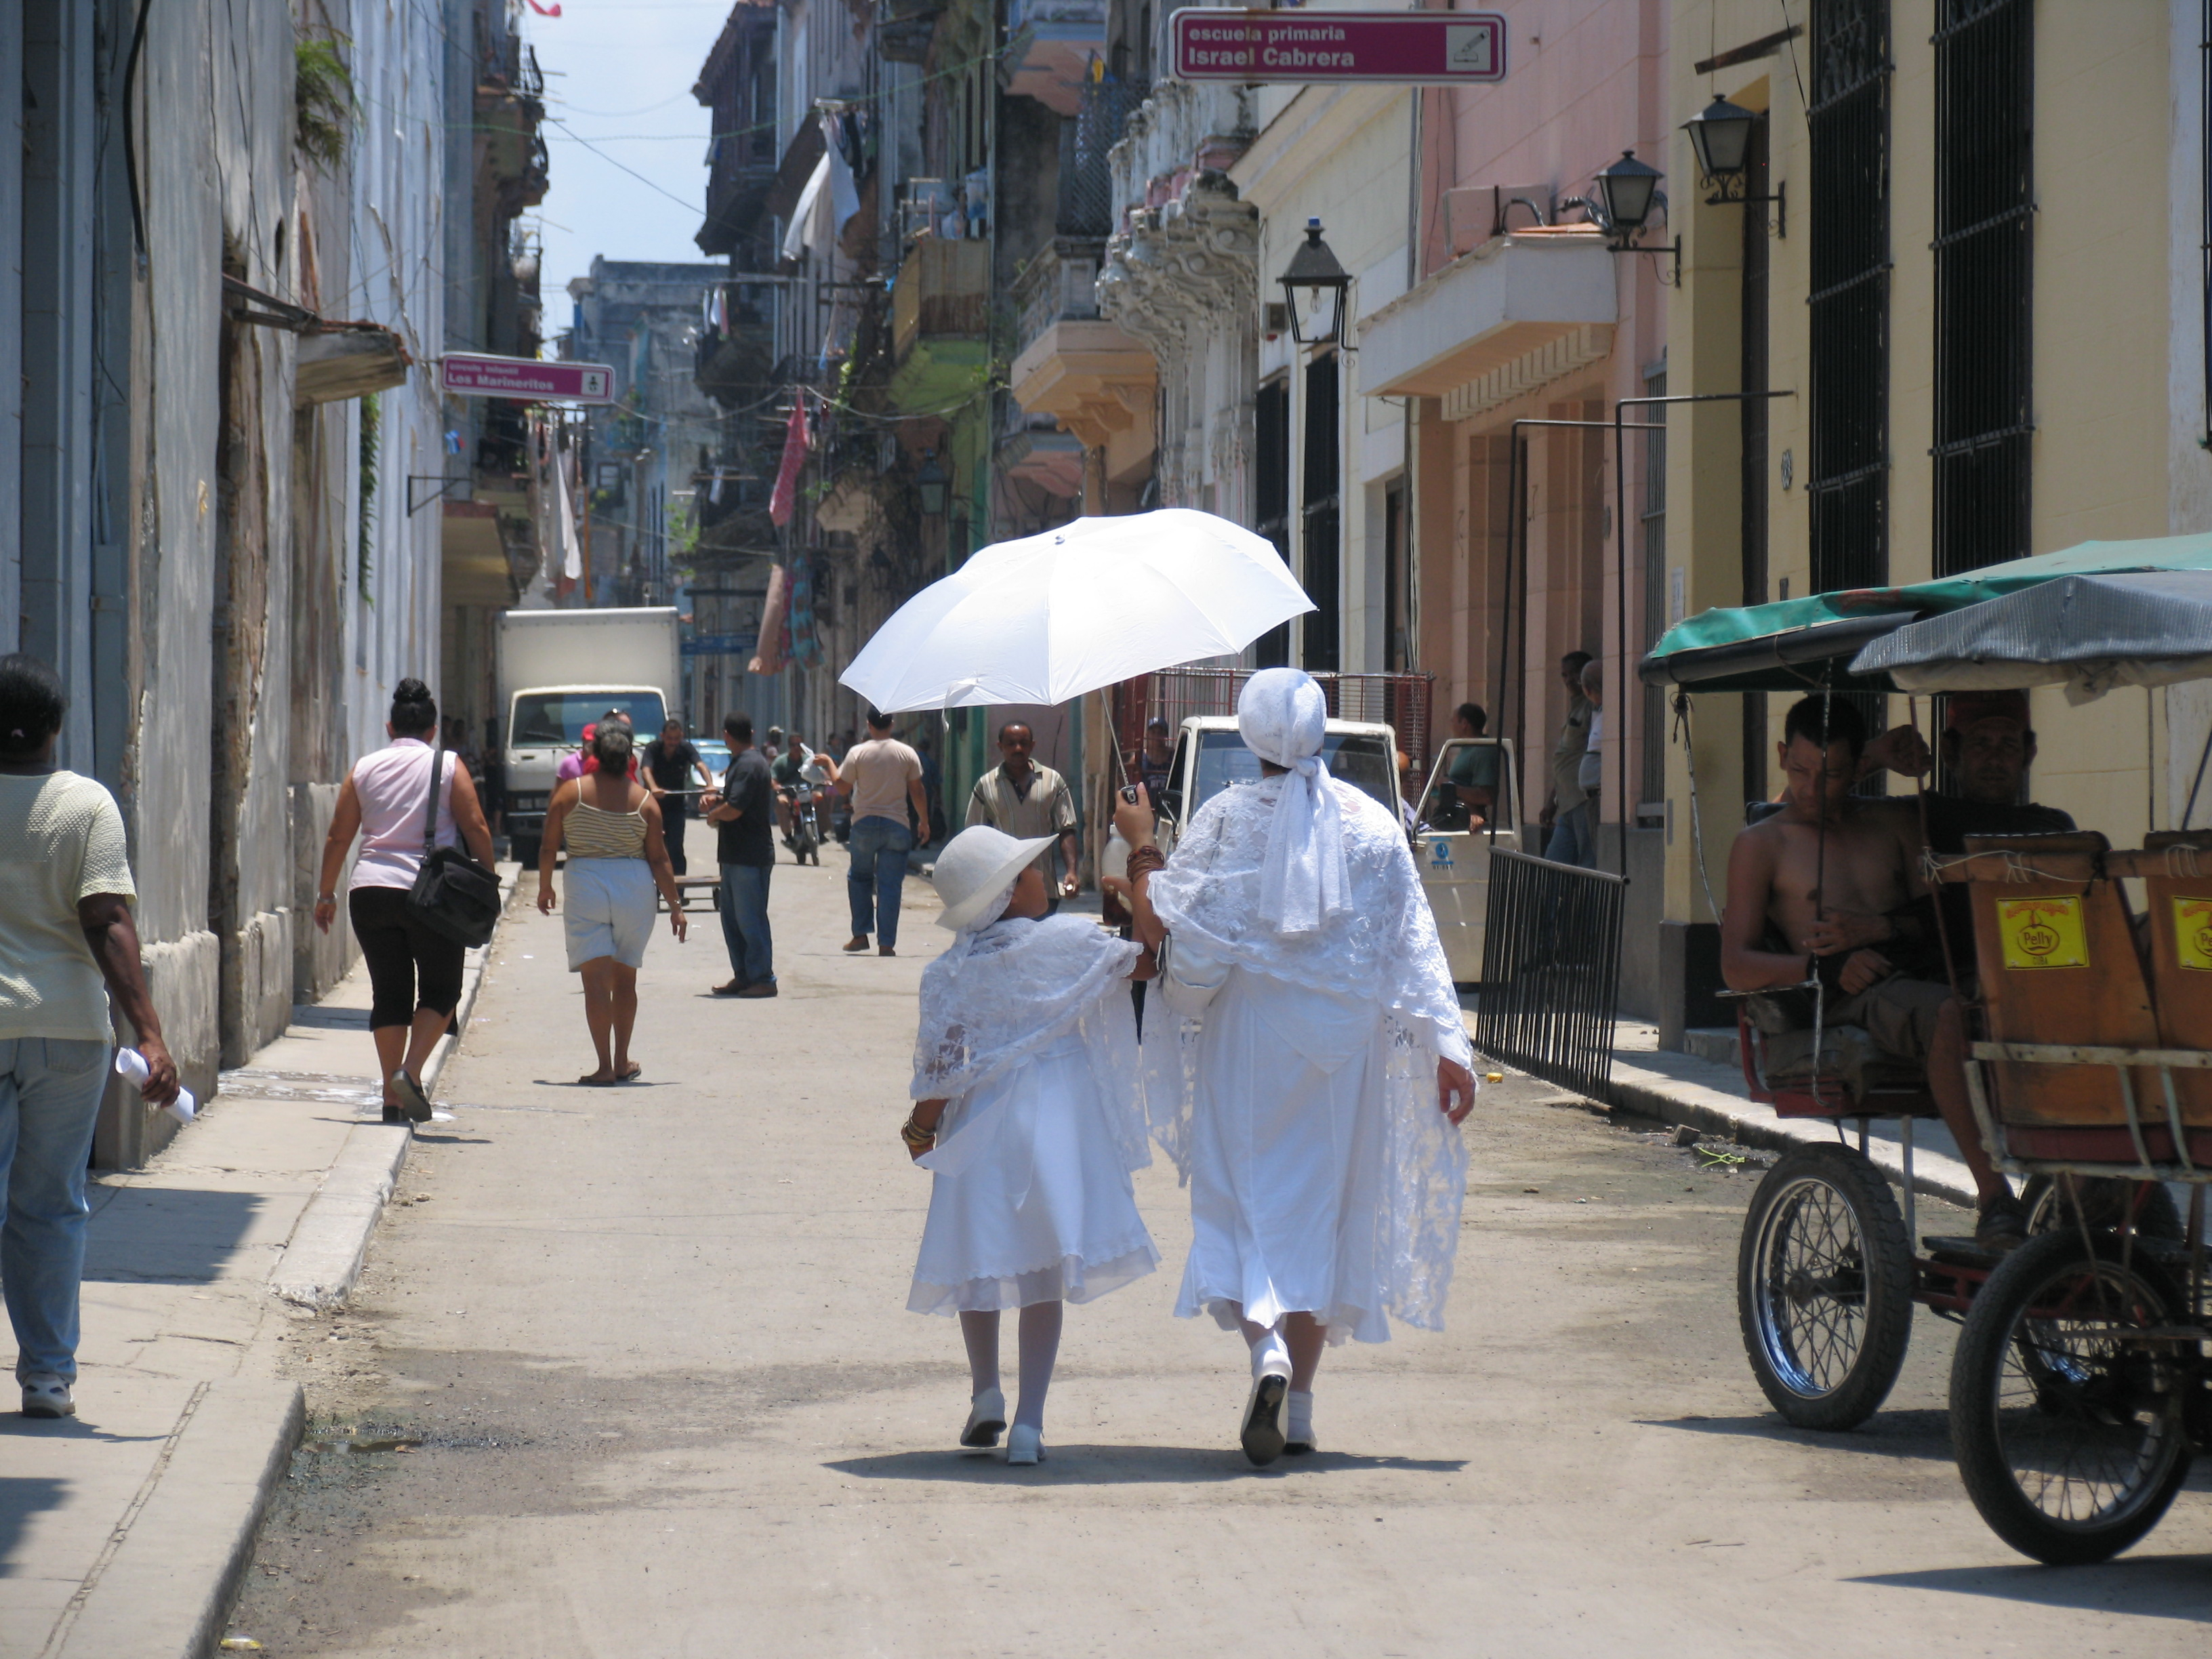 Photo © Lillian Guerra. A grandmother and granddaughter dressed as yabós, as part of their baptismal and ritual entry into the Santería faith, Old Havana, Cuba, 2011. After decades of repression of Santería, the main Afro-Cuban religion, the Cuban government's lifting of sanctions against its practice has revitalized it enormously. Multiple generations are now rediscovering their black identities through the religion their ancestors used to help them survive slavery.